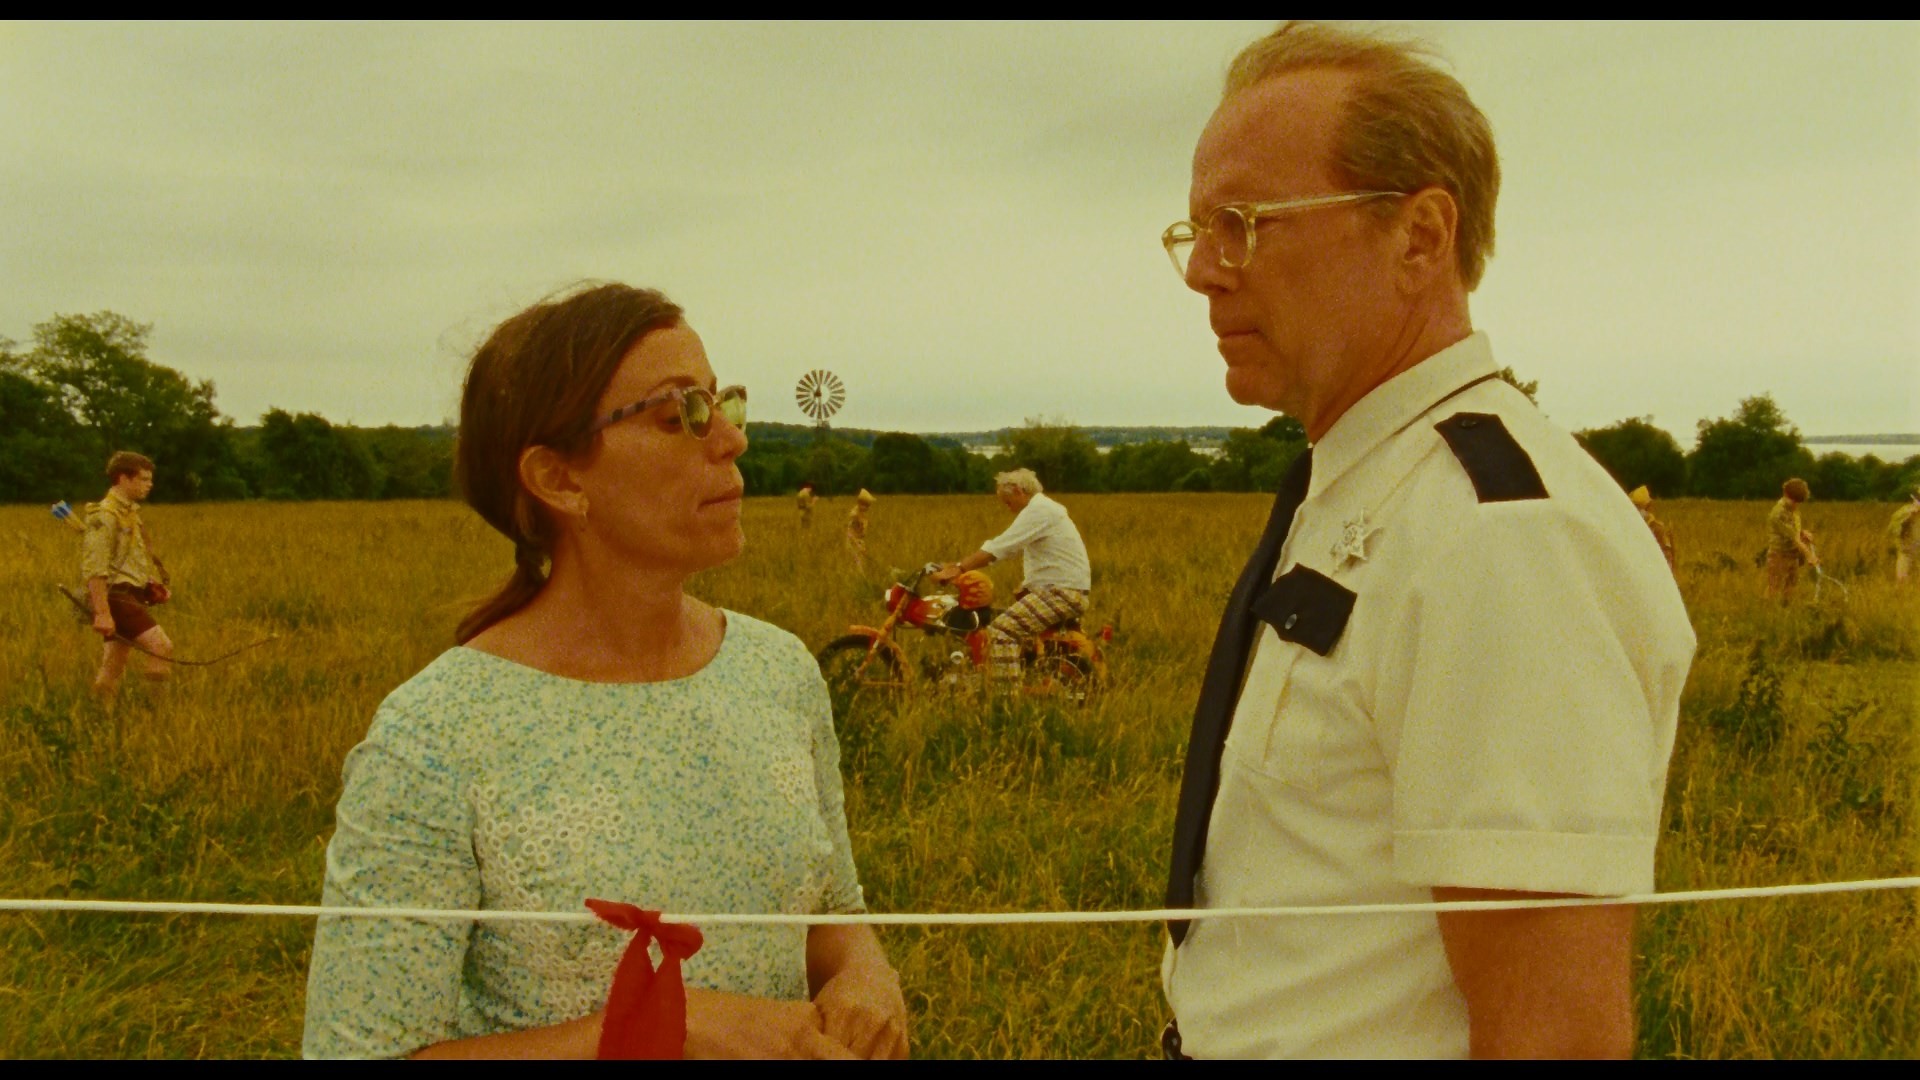 1920x1080 The gallery for --> Moonrise Kingdom Wallpaper Iphone. The gallery for  --> Moonrise Kingdom Wallpaper Iphone